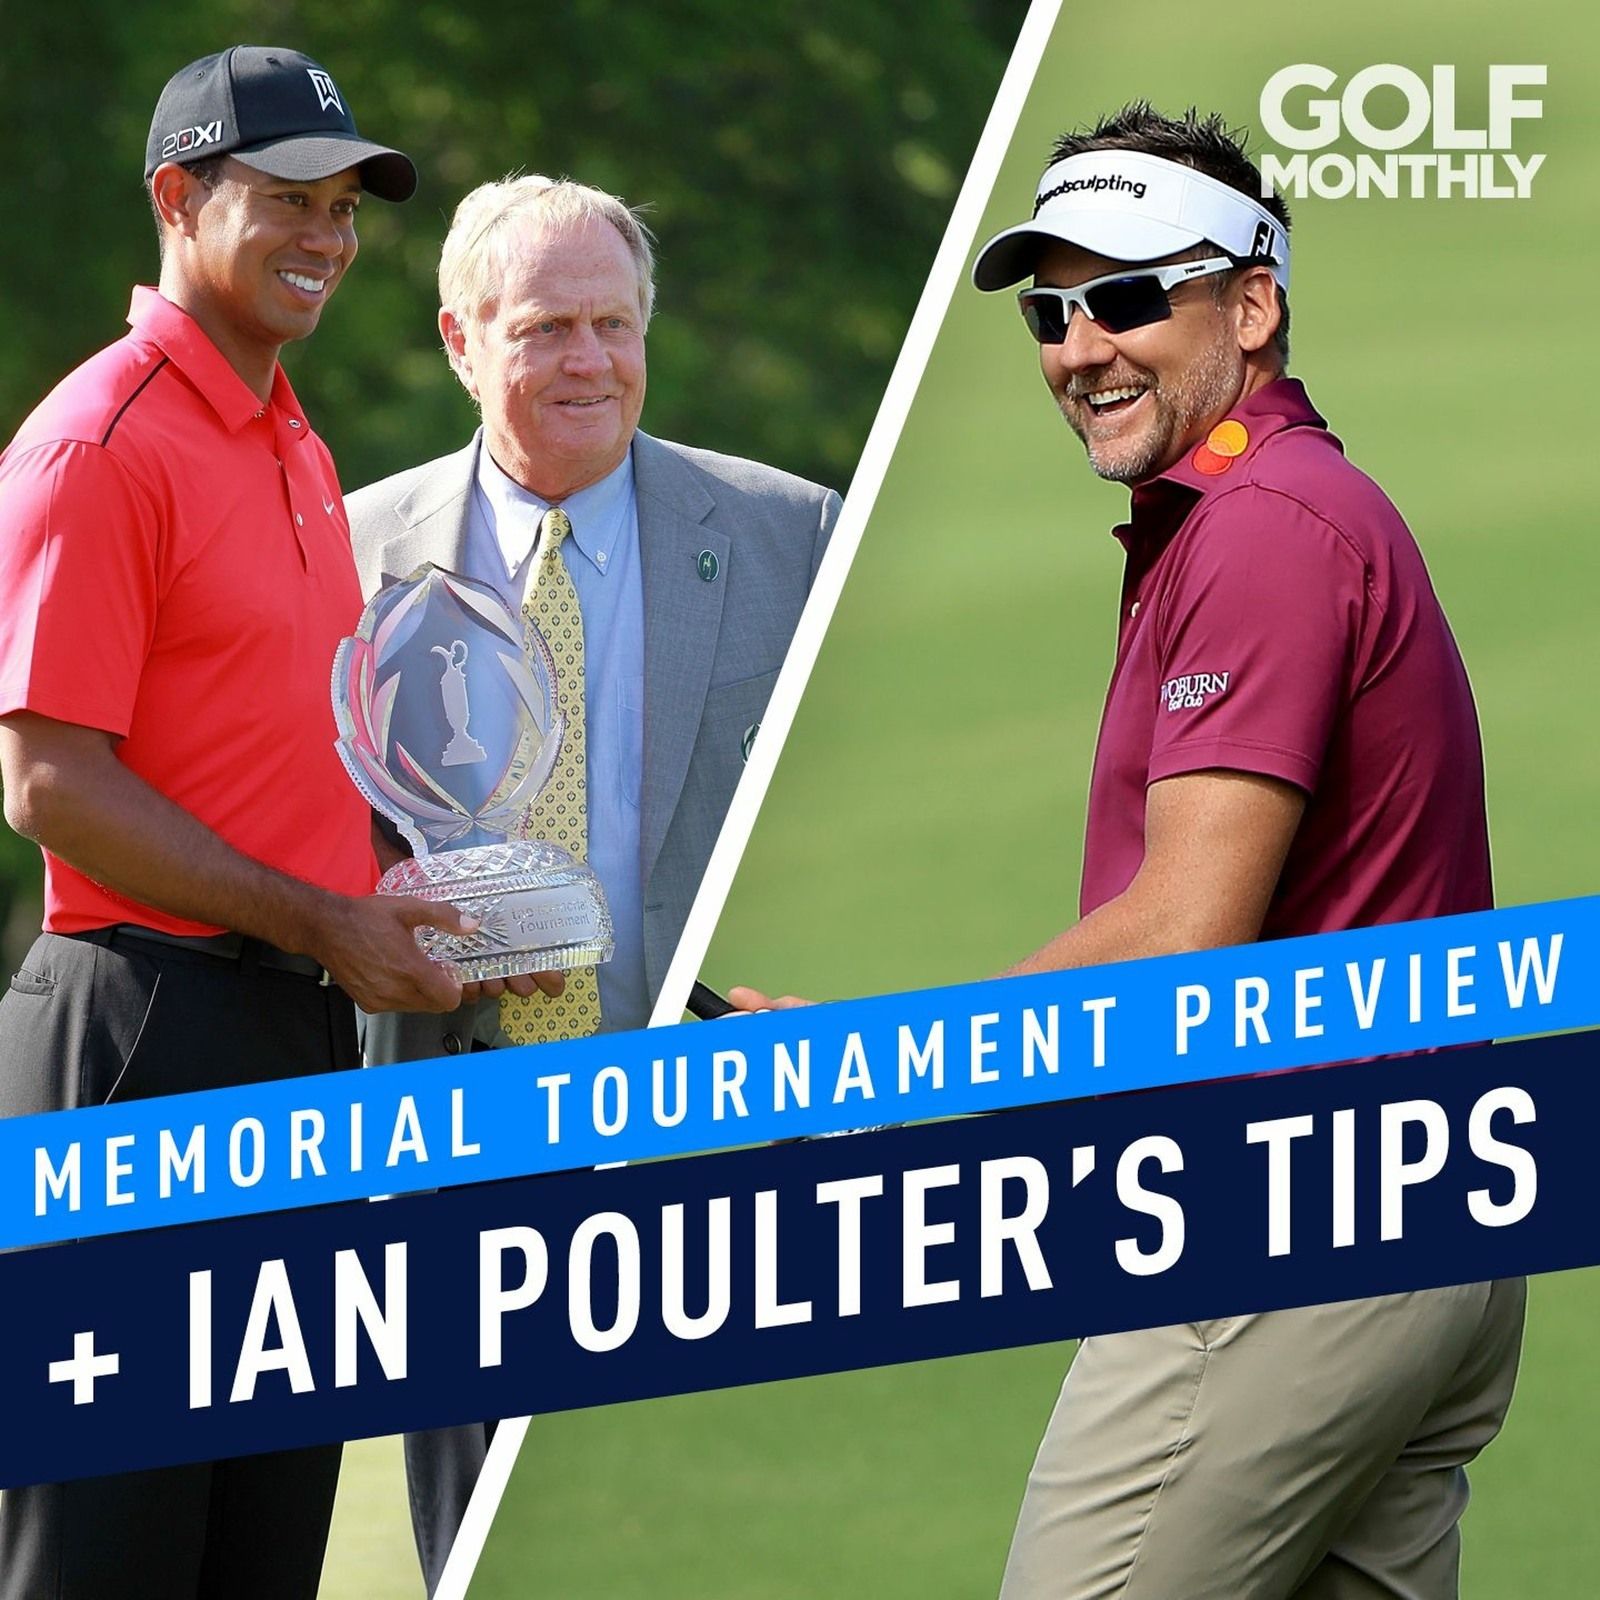 Ian Poulter's Tips + Is The New Schedule Good For Golf?